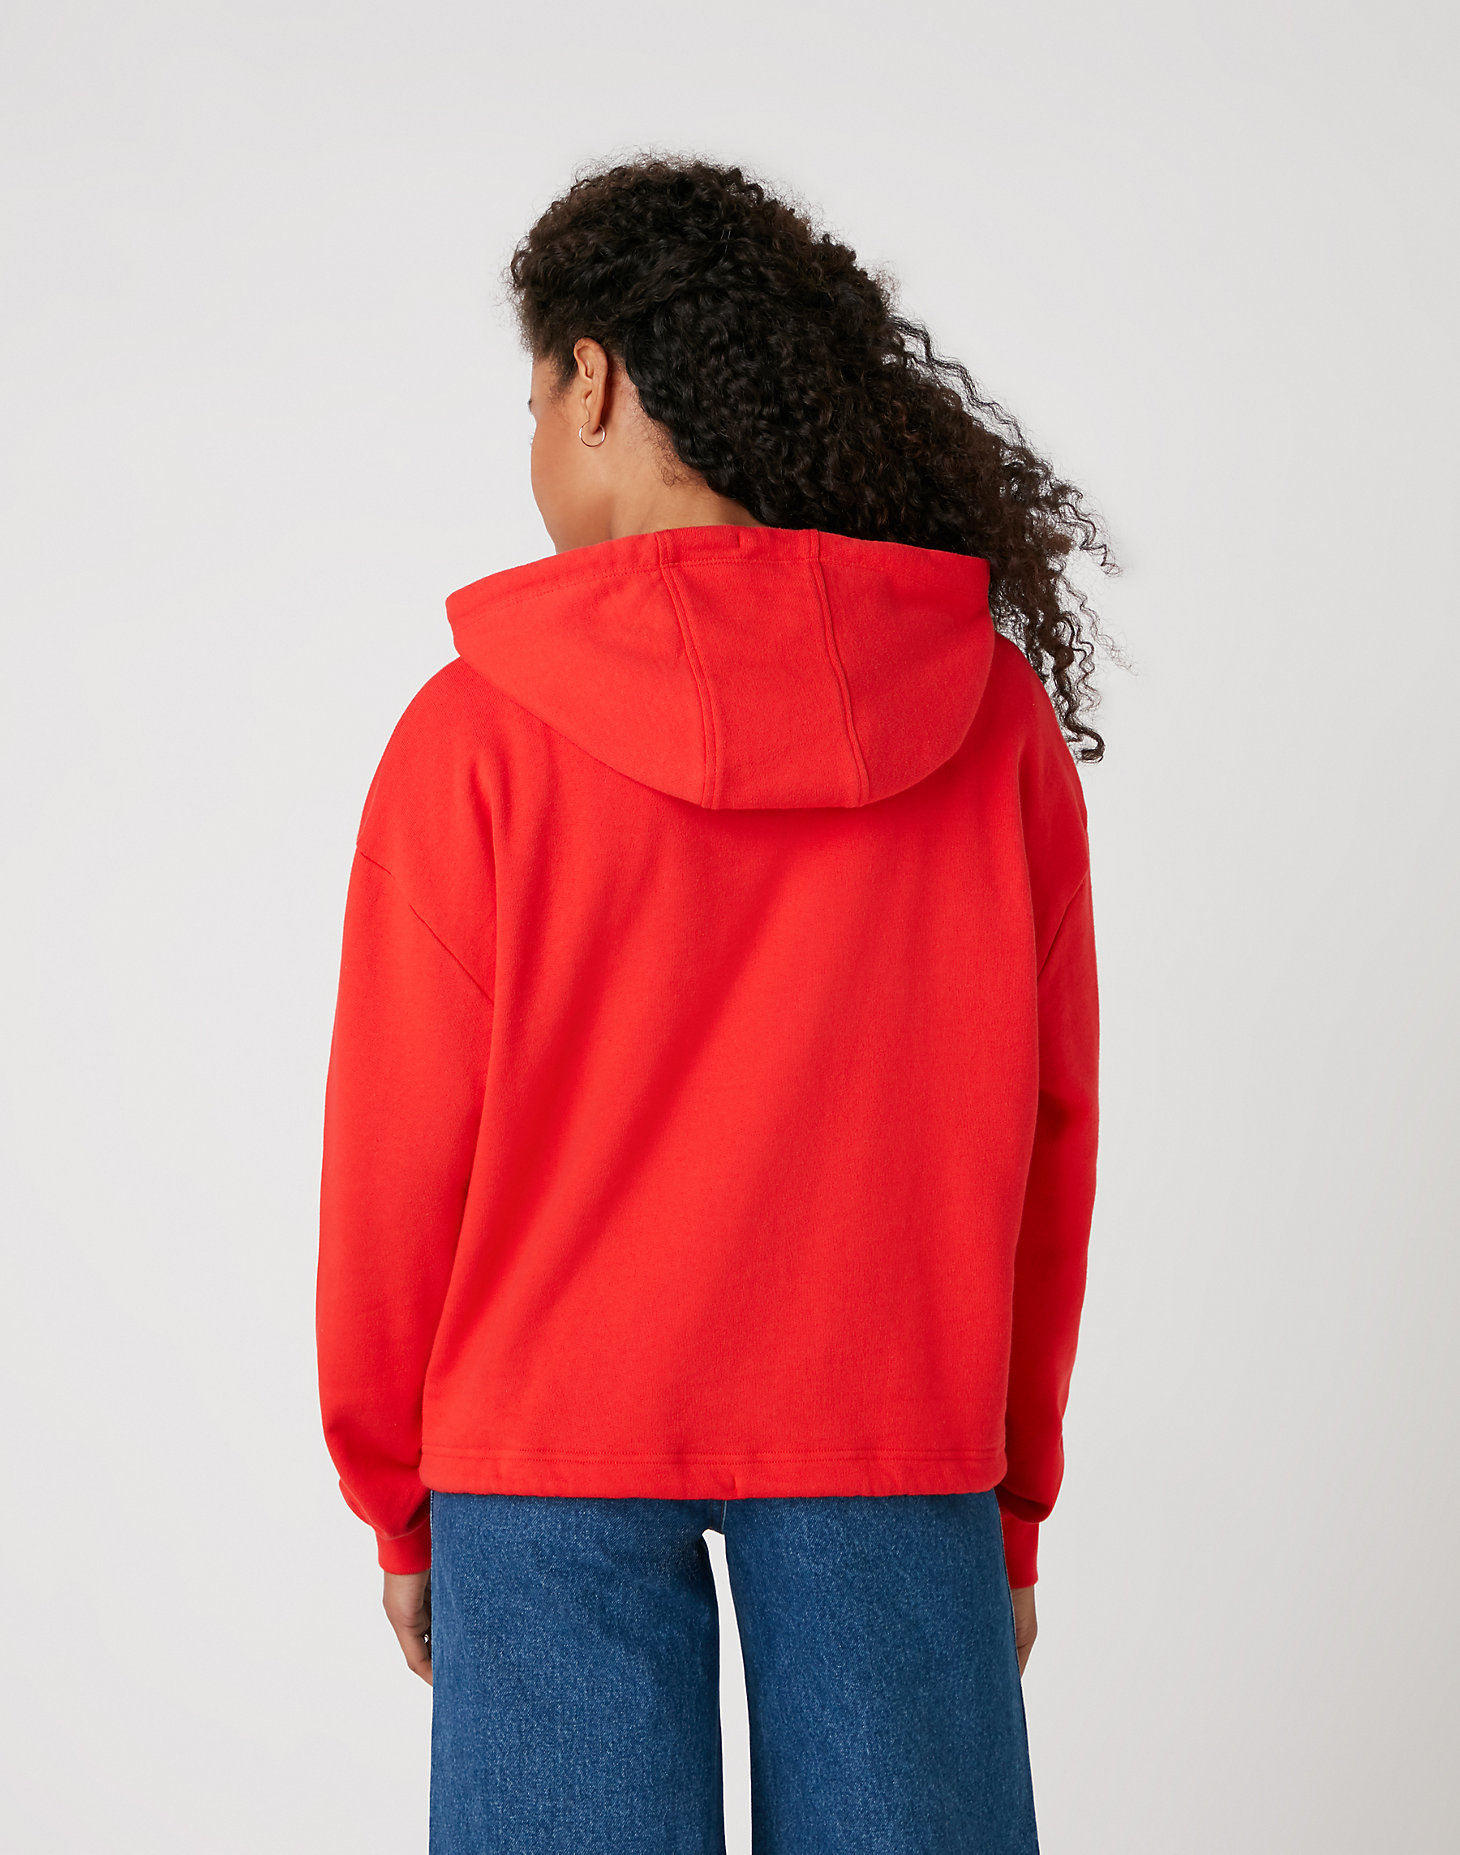 Drawcord Hoody in Flame Red alternative view 2